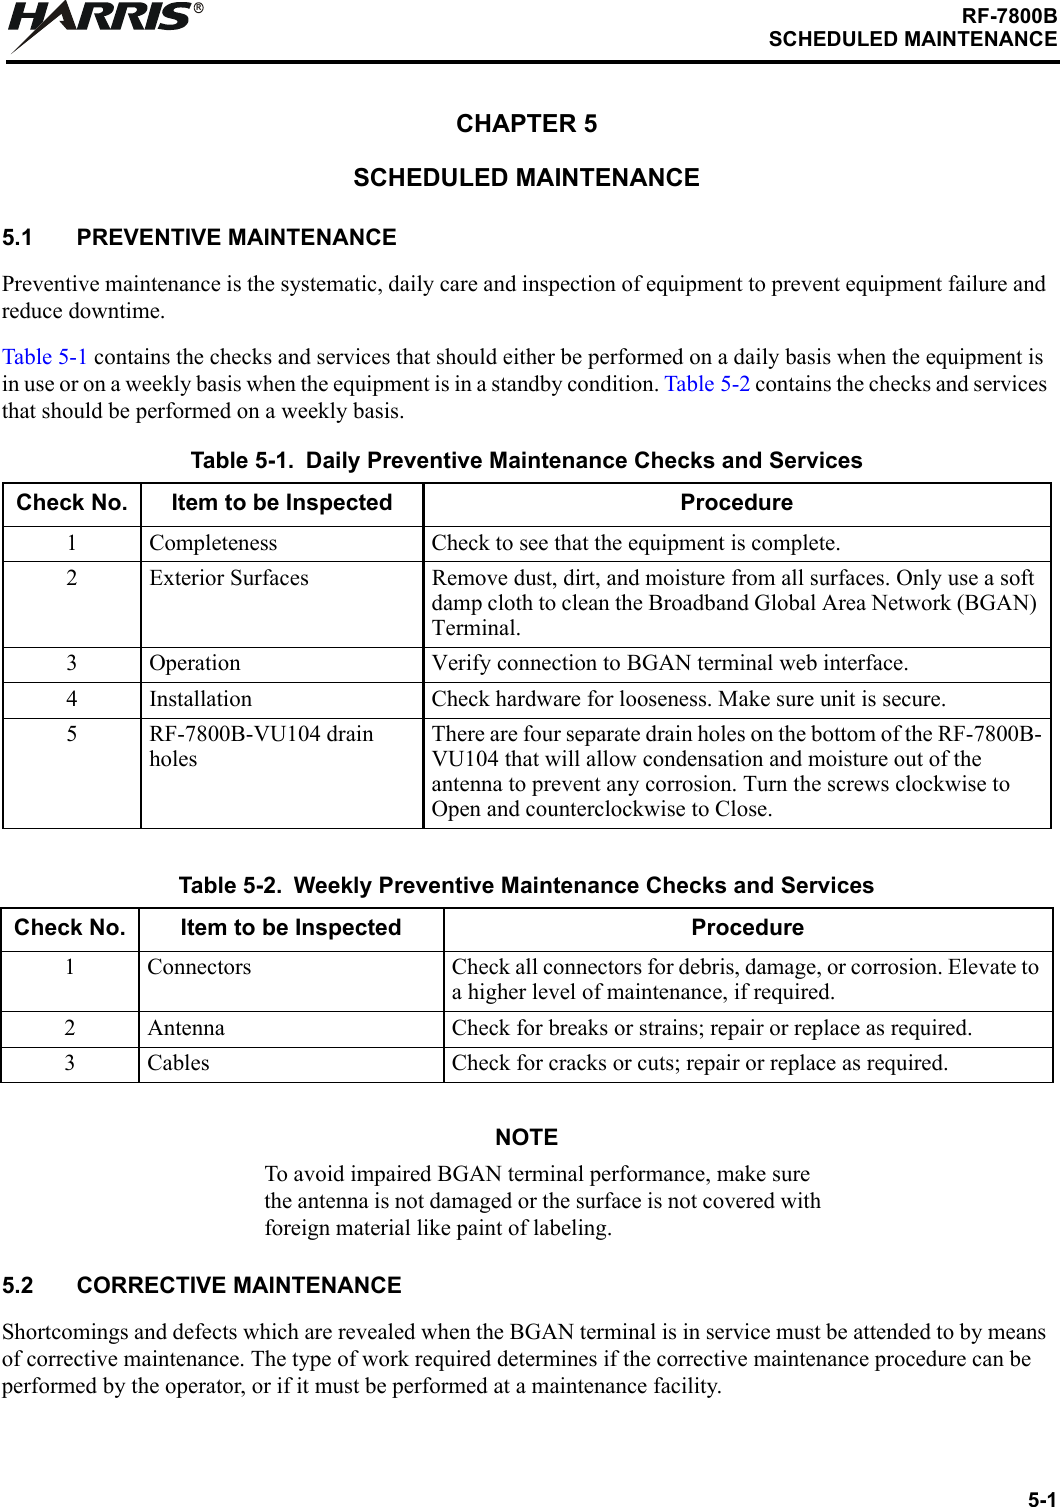 5-1RF-7800BSCHEDULED MAINTENANCERCHAPTER 5SCHEDULED MAINTENANCE5.1 PREVENTIVE MAINTENANCEPreventive maintenance is the systematic, daily care and inspection of equipment to prevent equipment failure and reduce downtime.Table 5-1 contains the checks and services that should either be performed on a daily basis when the equipment is in use or on a weekly basis when the equipment is in a standby condition. Table 5-2 contains the checks and services that should be performed on a weekly basis.NOTETo avoid impaired BGAN terminal performance, make sure the antenna is not damaged or the surface is not covered with foreign material like paint of labeling.5.2 CORRECTIVE MAINTENANCEShortcomings and defects which are revealed when the BGAN terminal is in service must be attended to by means of corrective maintenance. The type of work required determines if the corrective maintenance procedure can be performed by the operator, or if it must be performed at a maintenance facility.Table 5-1. Daily Preventive Maintenance Checks and ServicesCheck No. Item to be Inspected Procedure1 Completeness Check to see that the equipment is complete.2 Exterior Surfaces Remove dust, dirt, and moisture from all surfaces. Only use a soft damp cloth to clean the Broadband Global Area Network (BGAN) Terminal.3 Operation Verify connection to BGAN terminal web interface.4 Installation Check hardware for looseness. Make sure unit is secure.5 RF-7800B-VU104 drain holesThere are four separate drain holes on the bottom of the RF-7800B-VU104 that will allow condensation and moisture out of the antenna to prevent any corrosion. Turn the screws clockwise to Open and counterclockwise to Close.Table 5-2. Weekly Preventive Maintenance Checks and ServicesCheck No. Item to be Inspected Procedure1 Connectors Check all connectors for debris, damage, or corrosion. Elevate to a higher level of maintenance, if required.2 Antenna Check for breaks or strains; repair or replace as required.3 Cables Check for cracks or cuts; repair or replace as required.